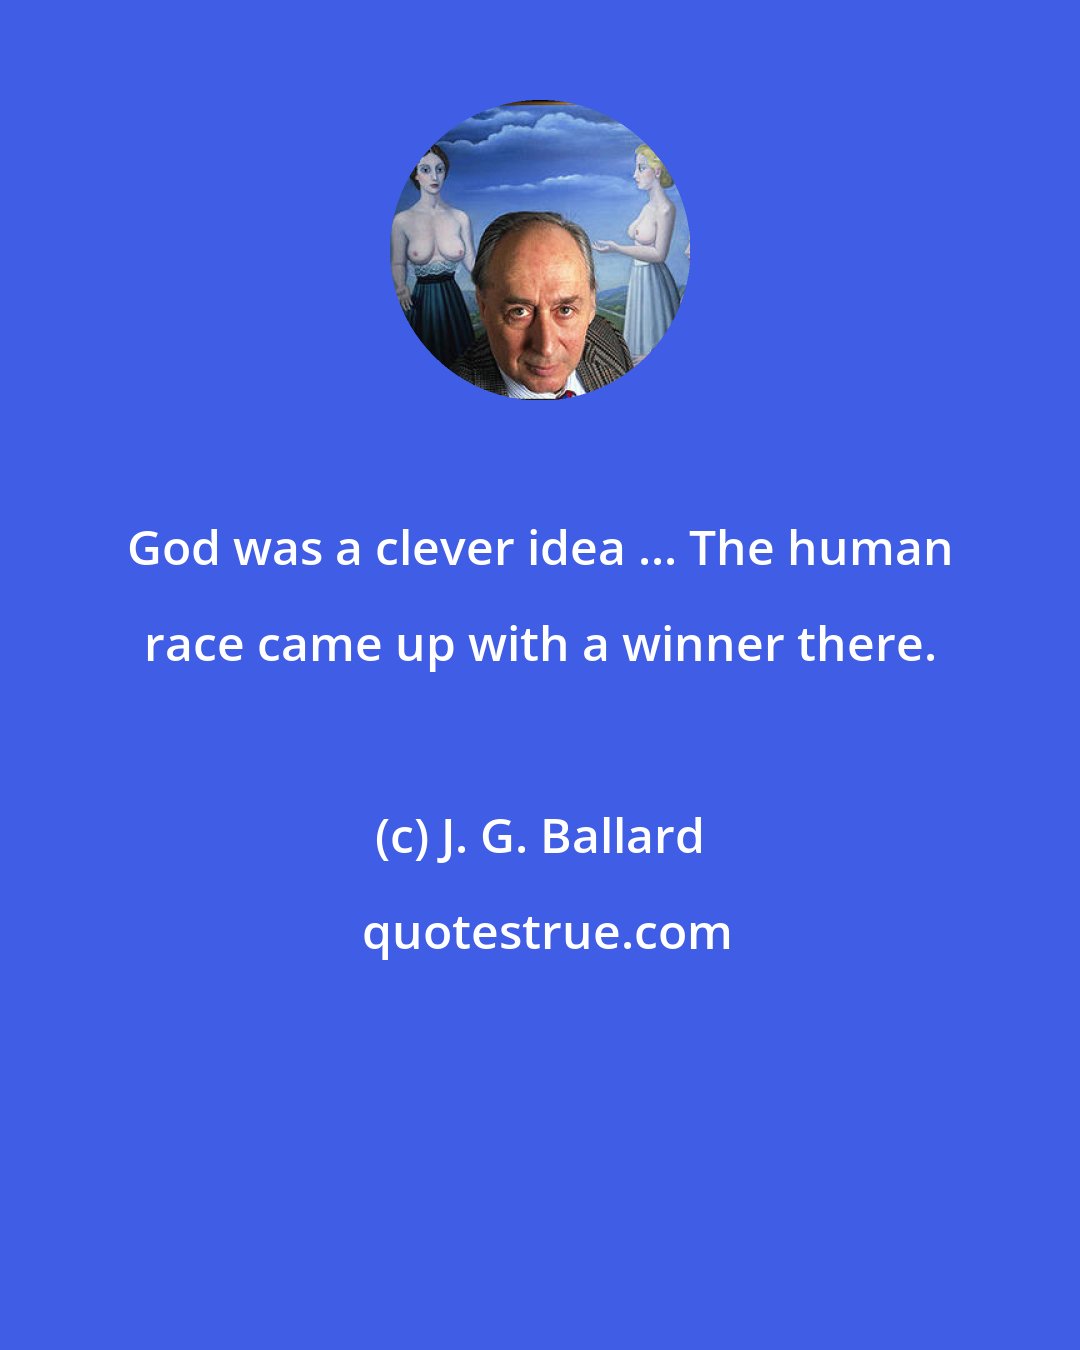 J. G. Ballard: God was a clever idea ... The human race came up with a winner there.